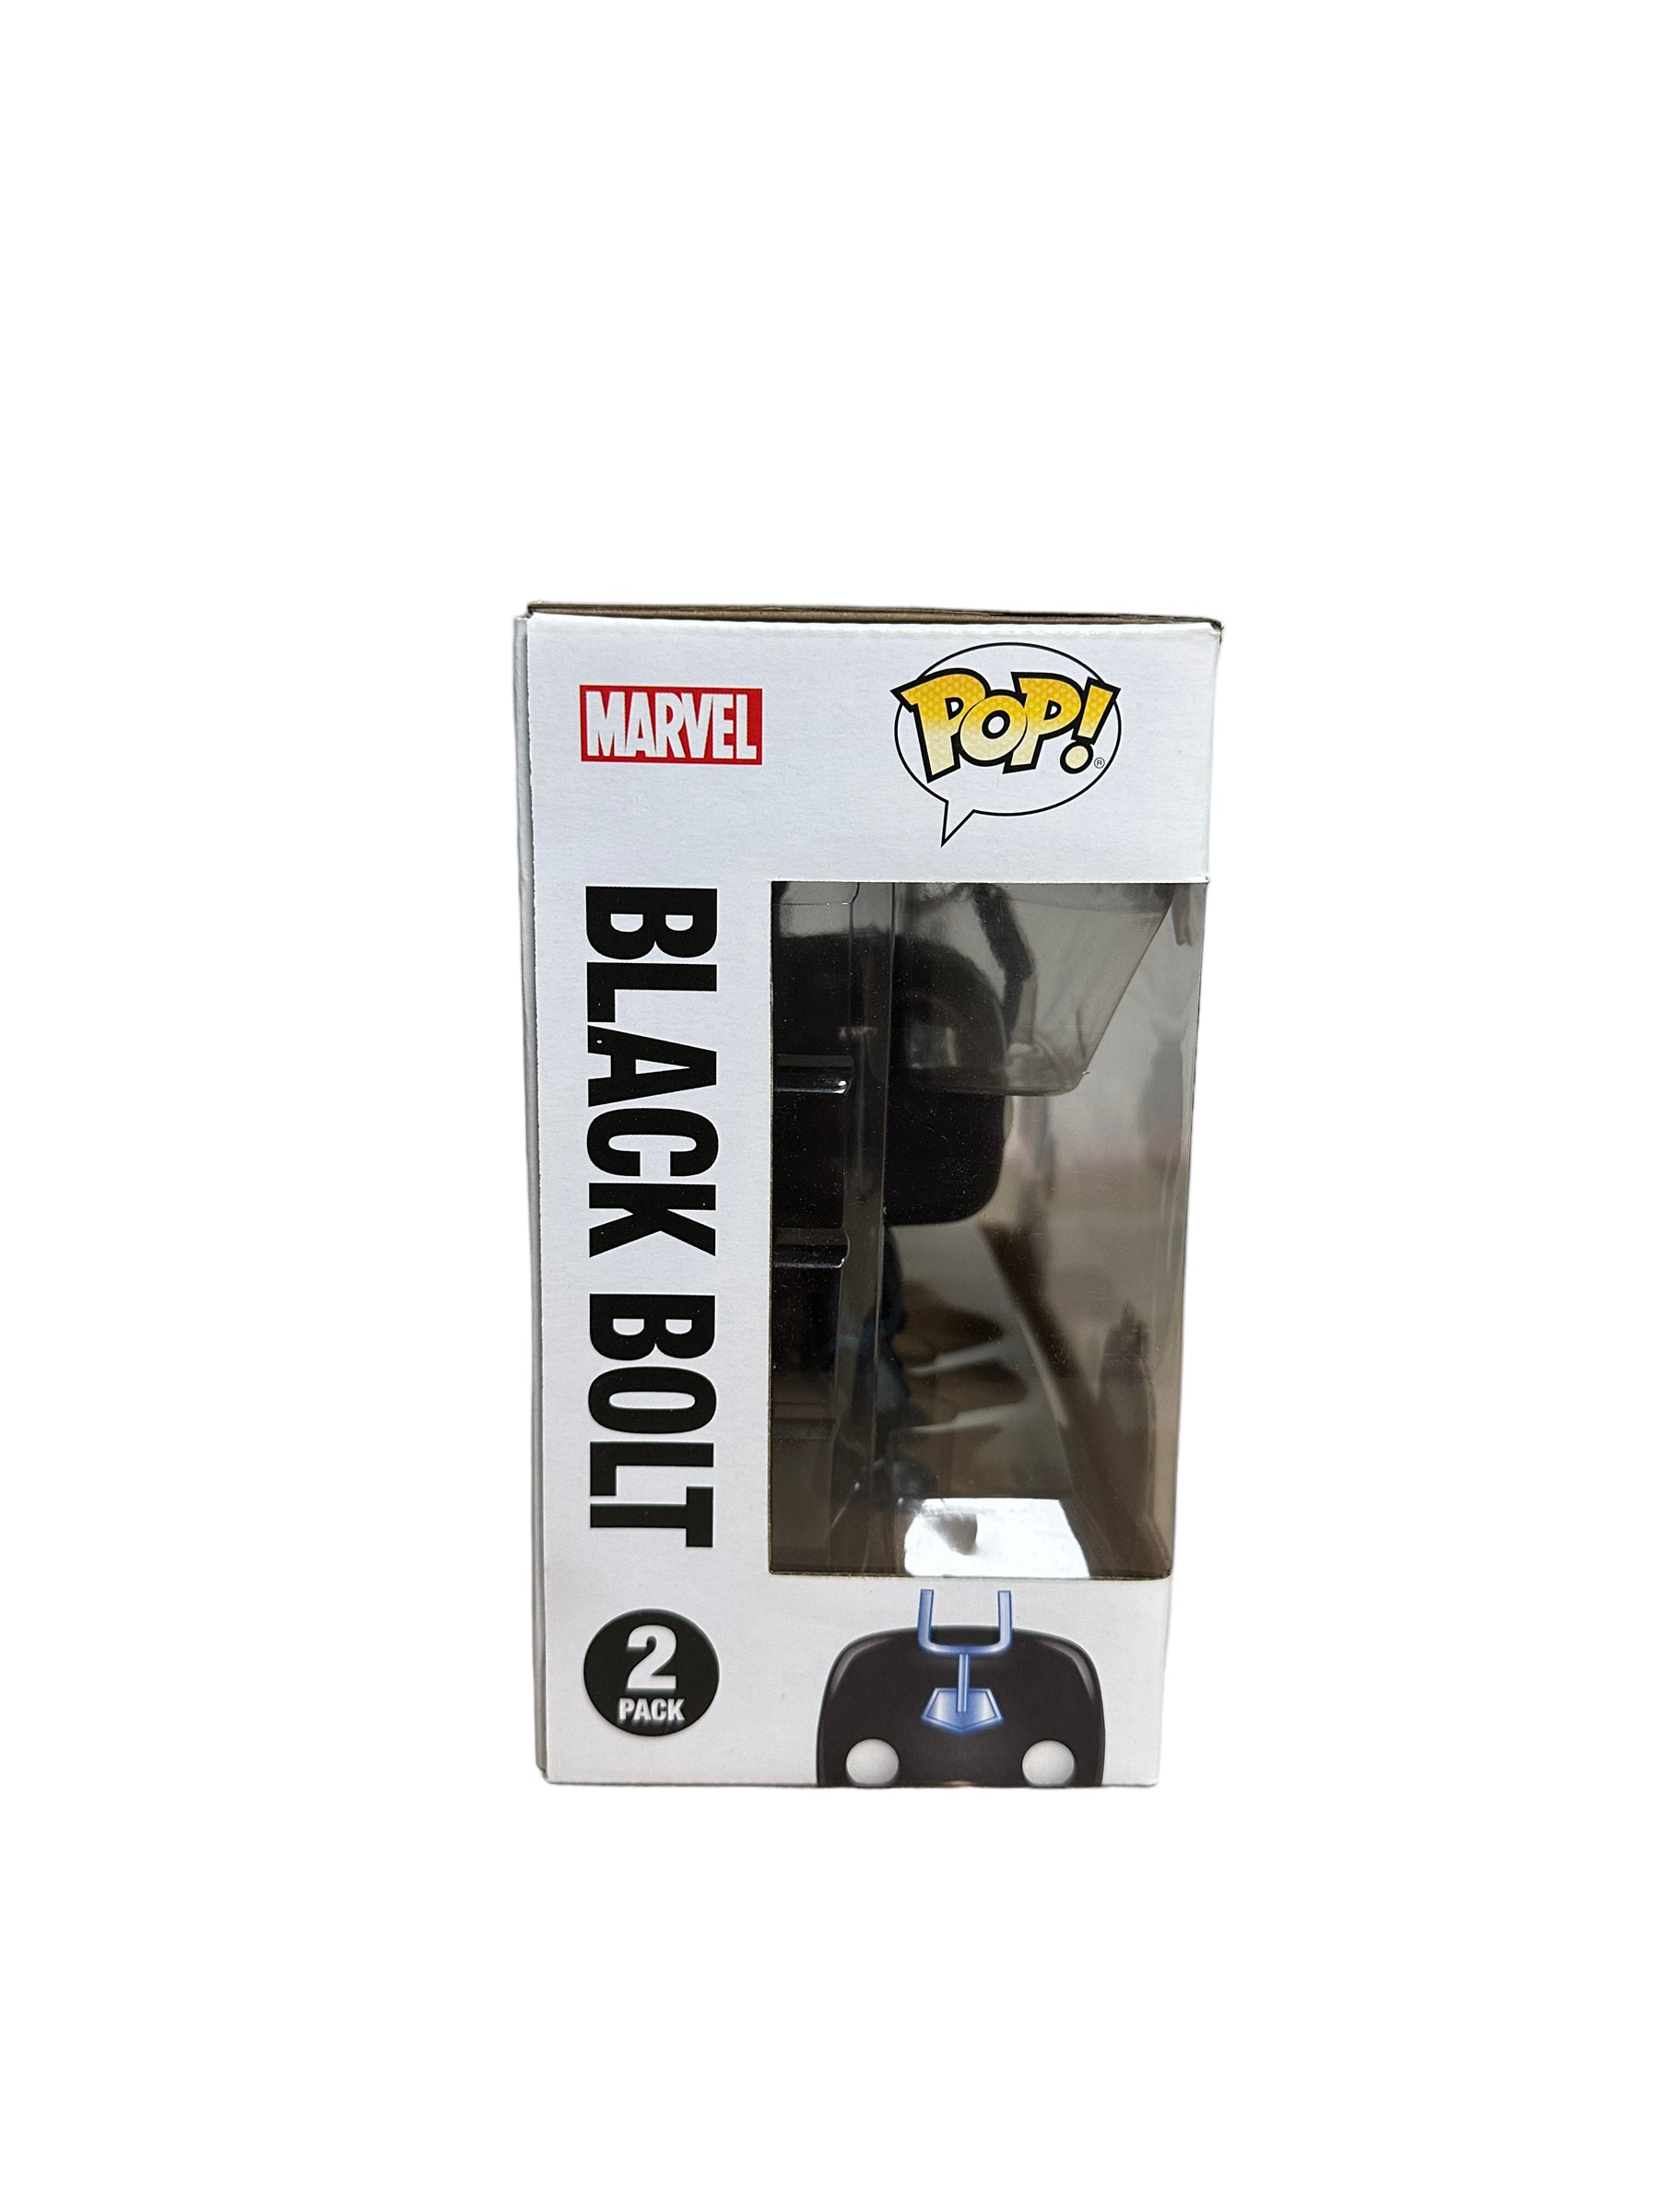 Black Bolt & Lockjaw (Glows in the Dark) 2 Pack Funko Pop! - Marvel - SDCC 2018 Official Convention / PX Previews Exclusive - Condition 8.75/10